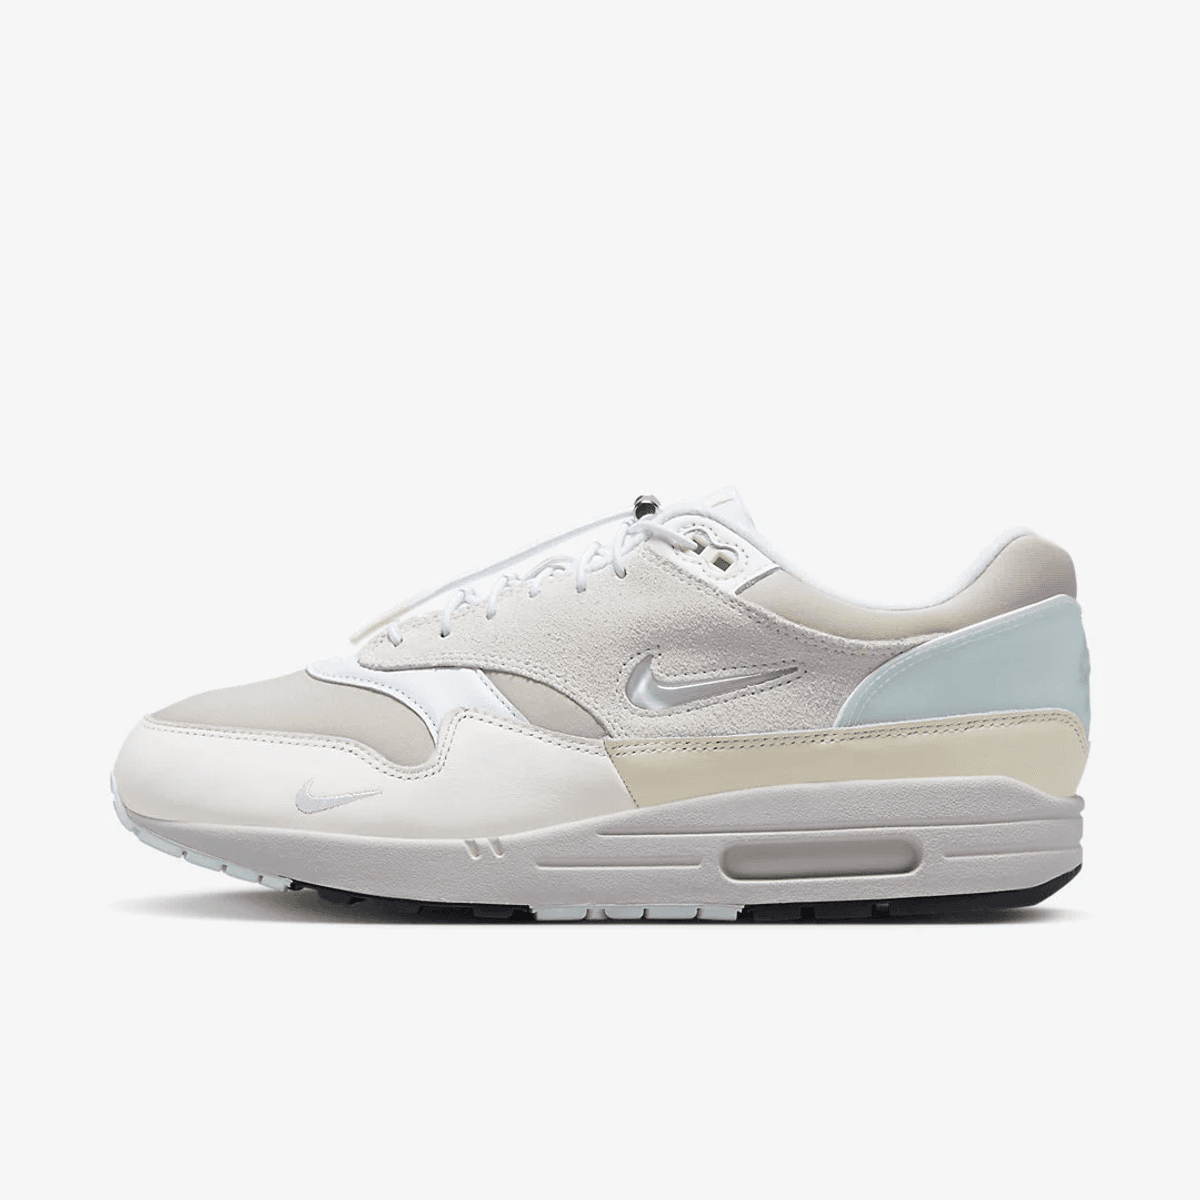 Celebrate Hangul Day With The New Nike Air Max 1